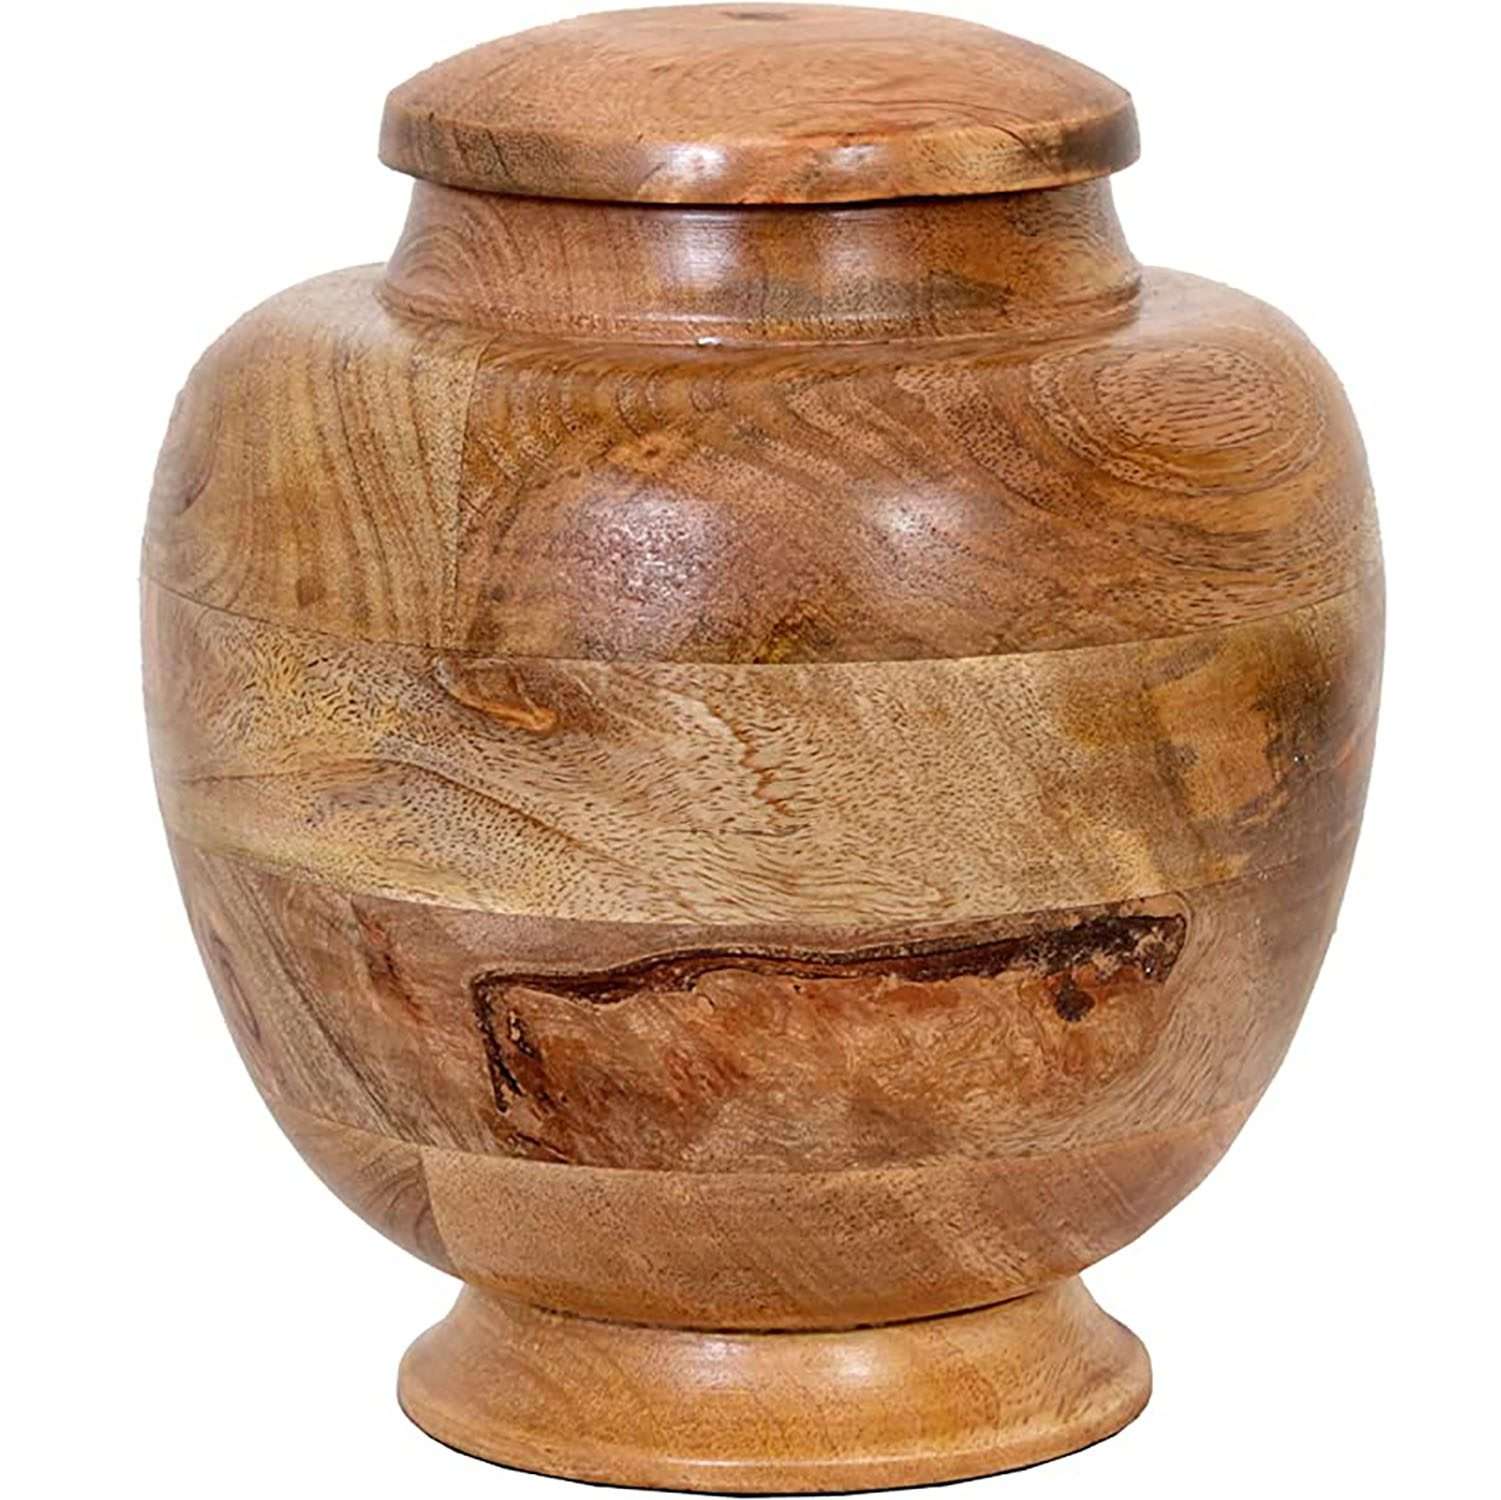 Wooden Handcrafted Urn For Human Ashes | Beautiful Large Wood Cremation Urn